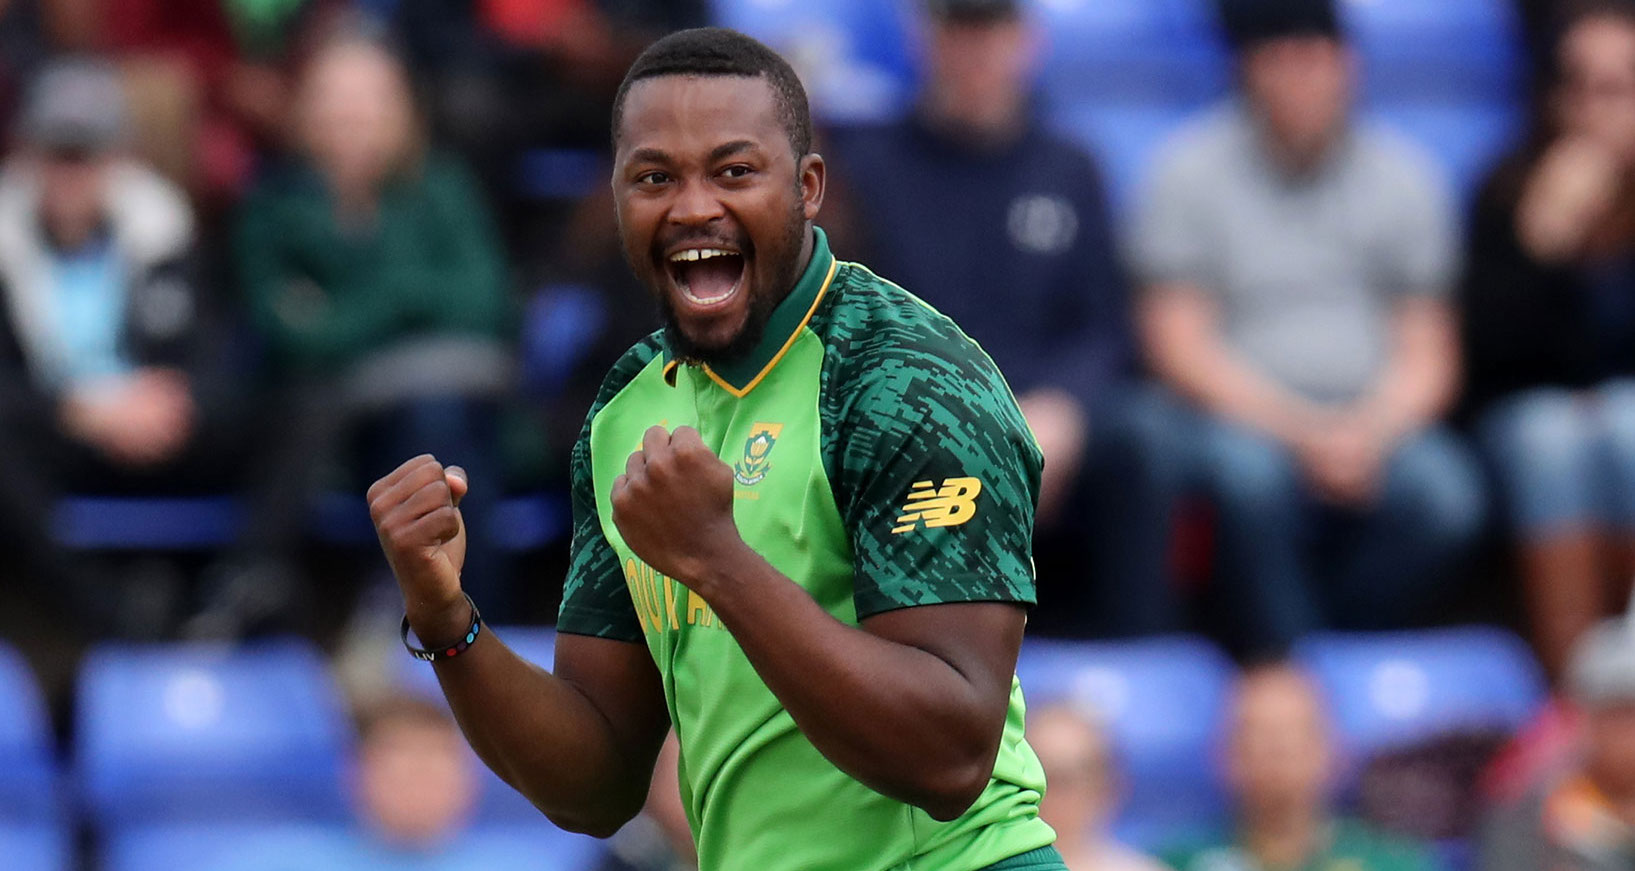 “I want to be the No 1 all-rounder in the world” – Andile Phehlukwayo